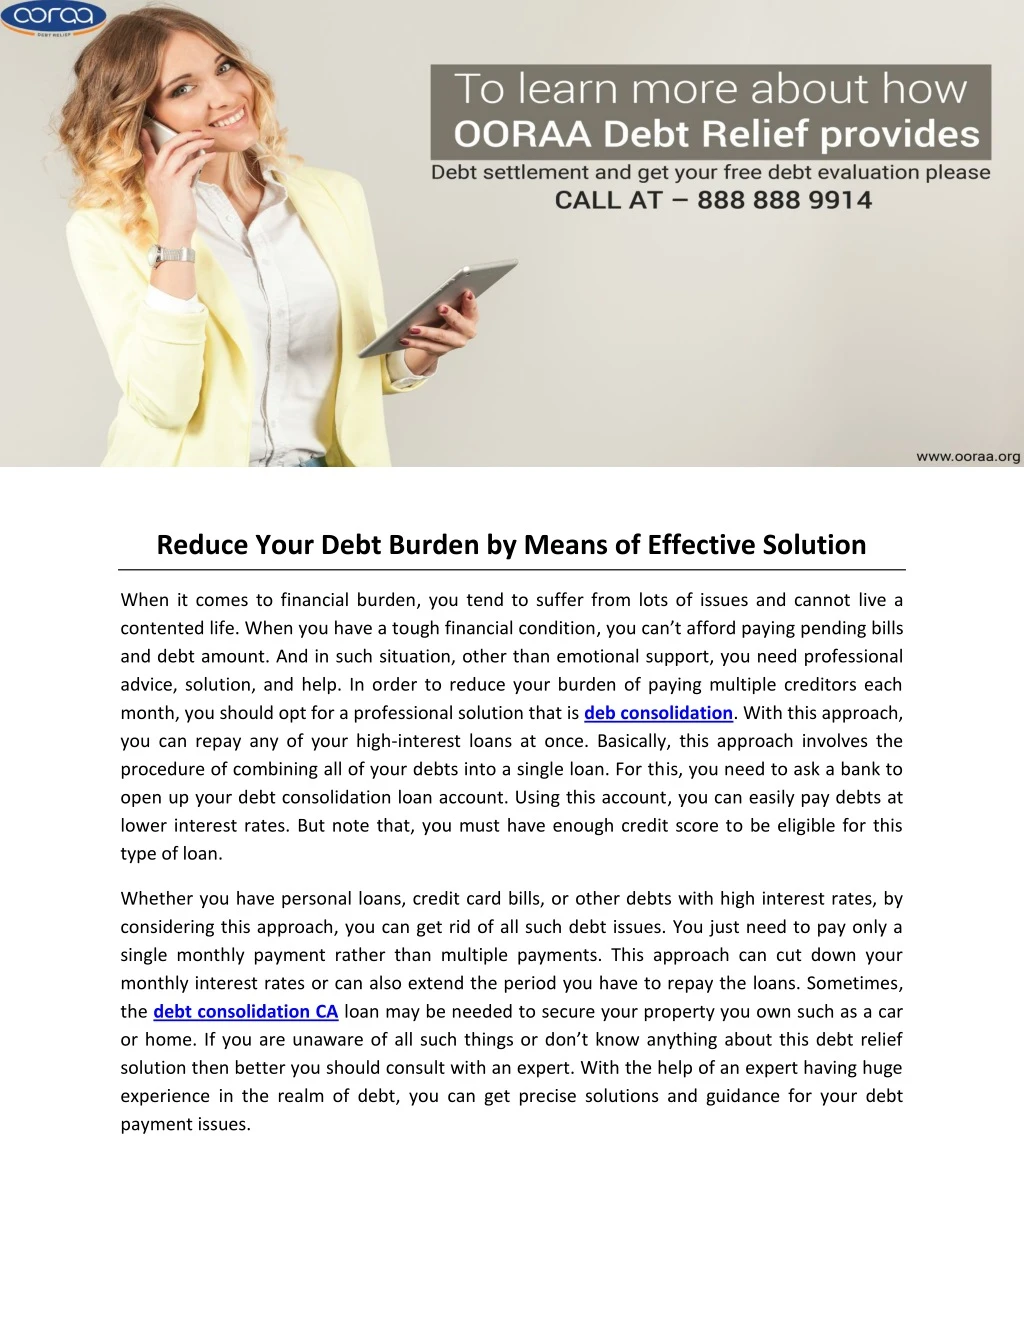 reduce your debt burden by means of effective